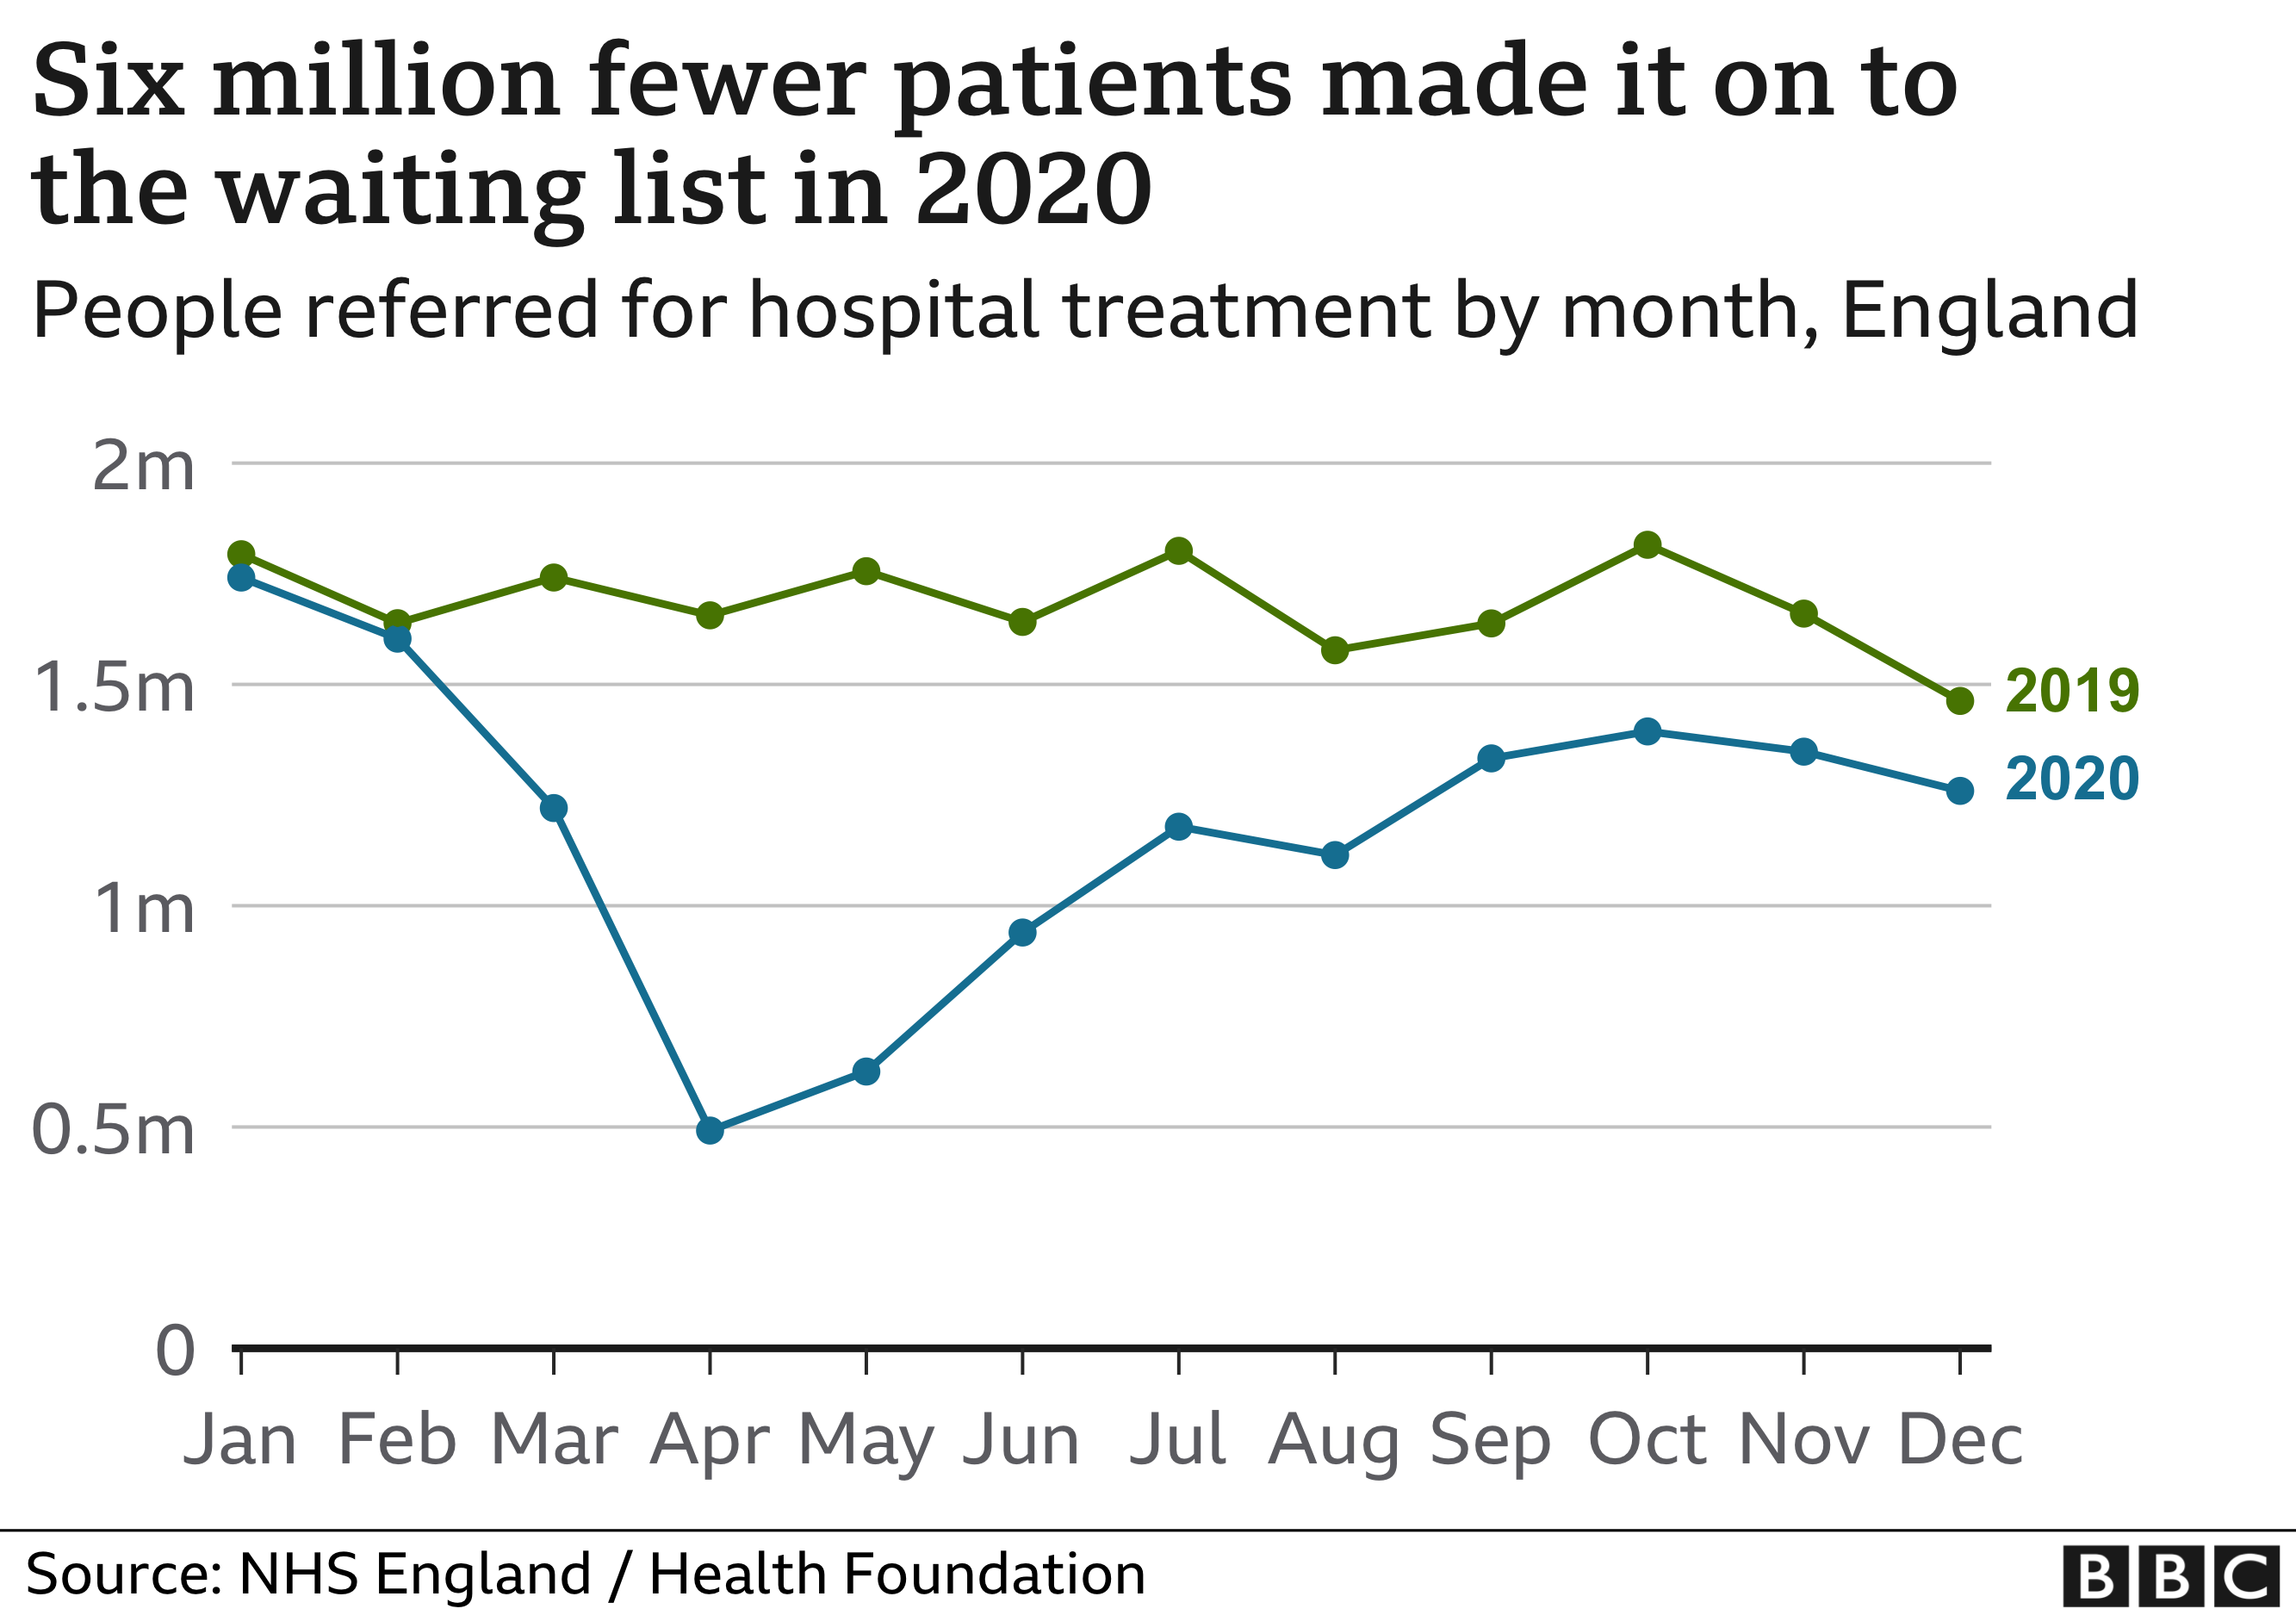 Number of referrals for hospital care